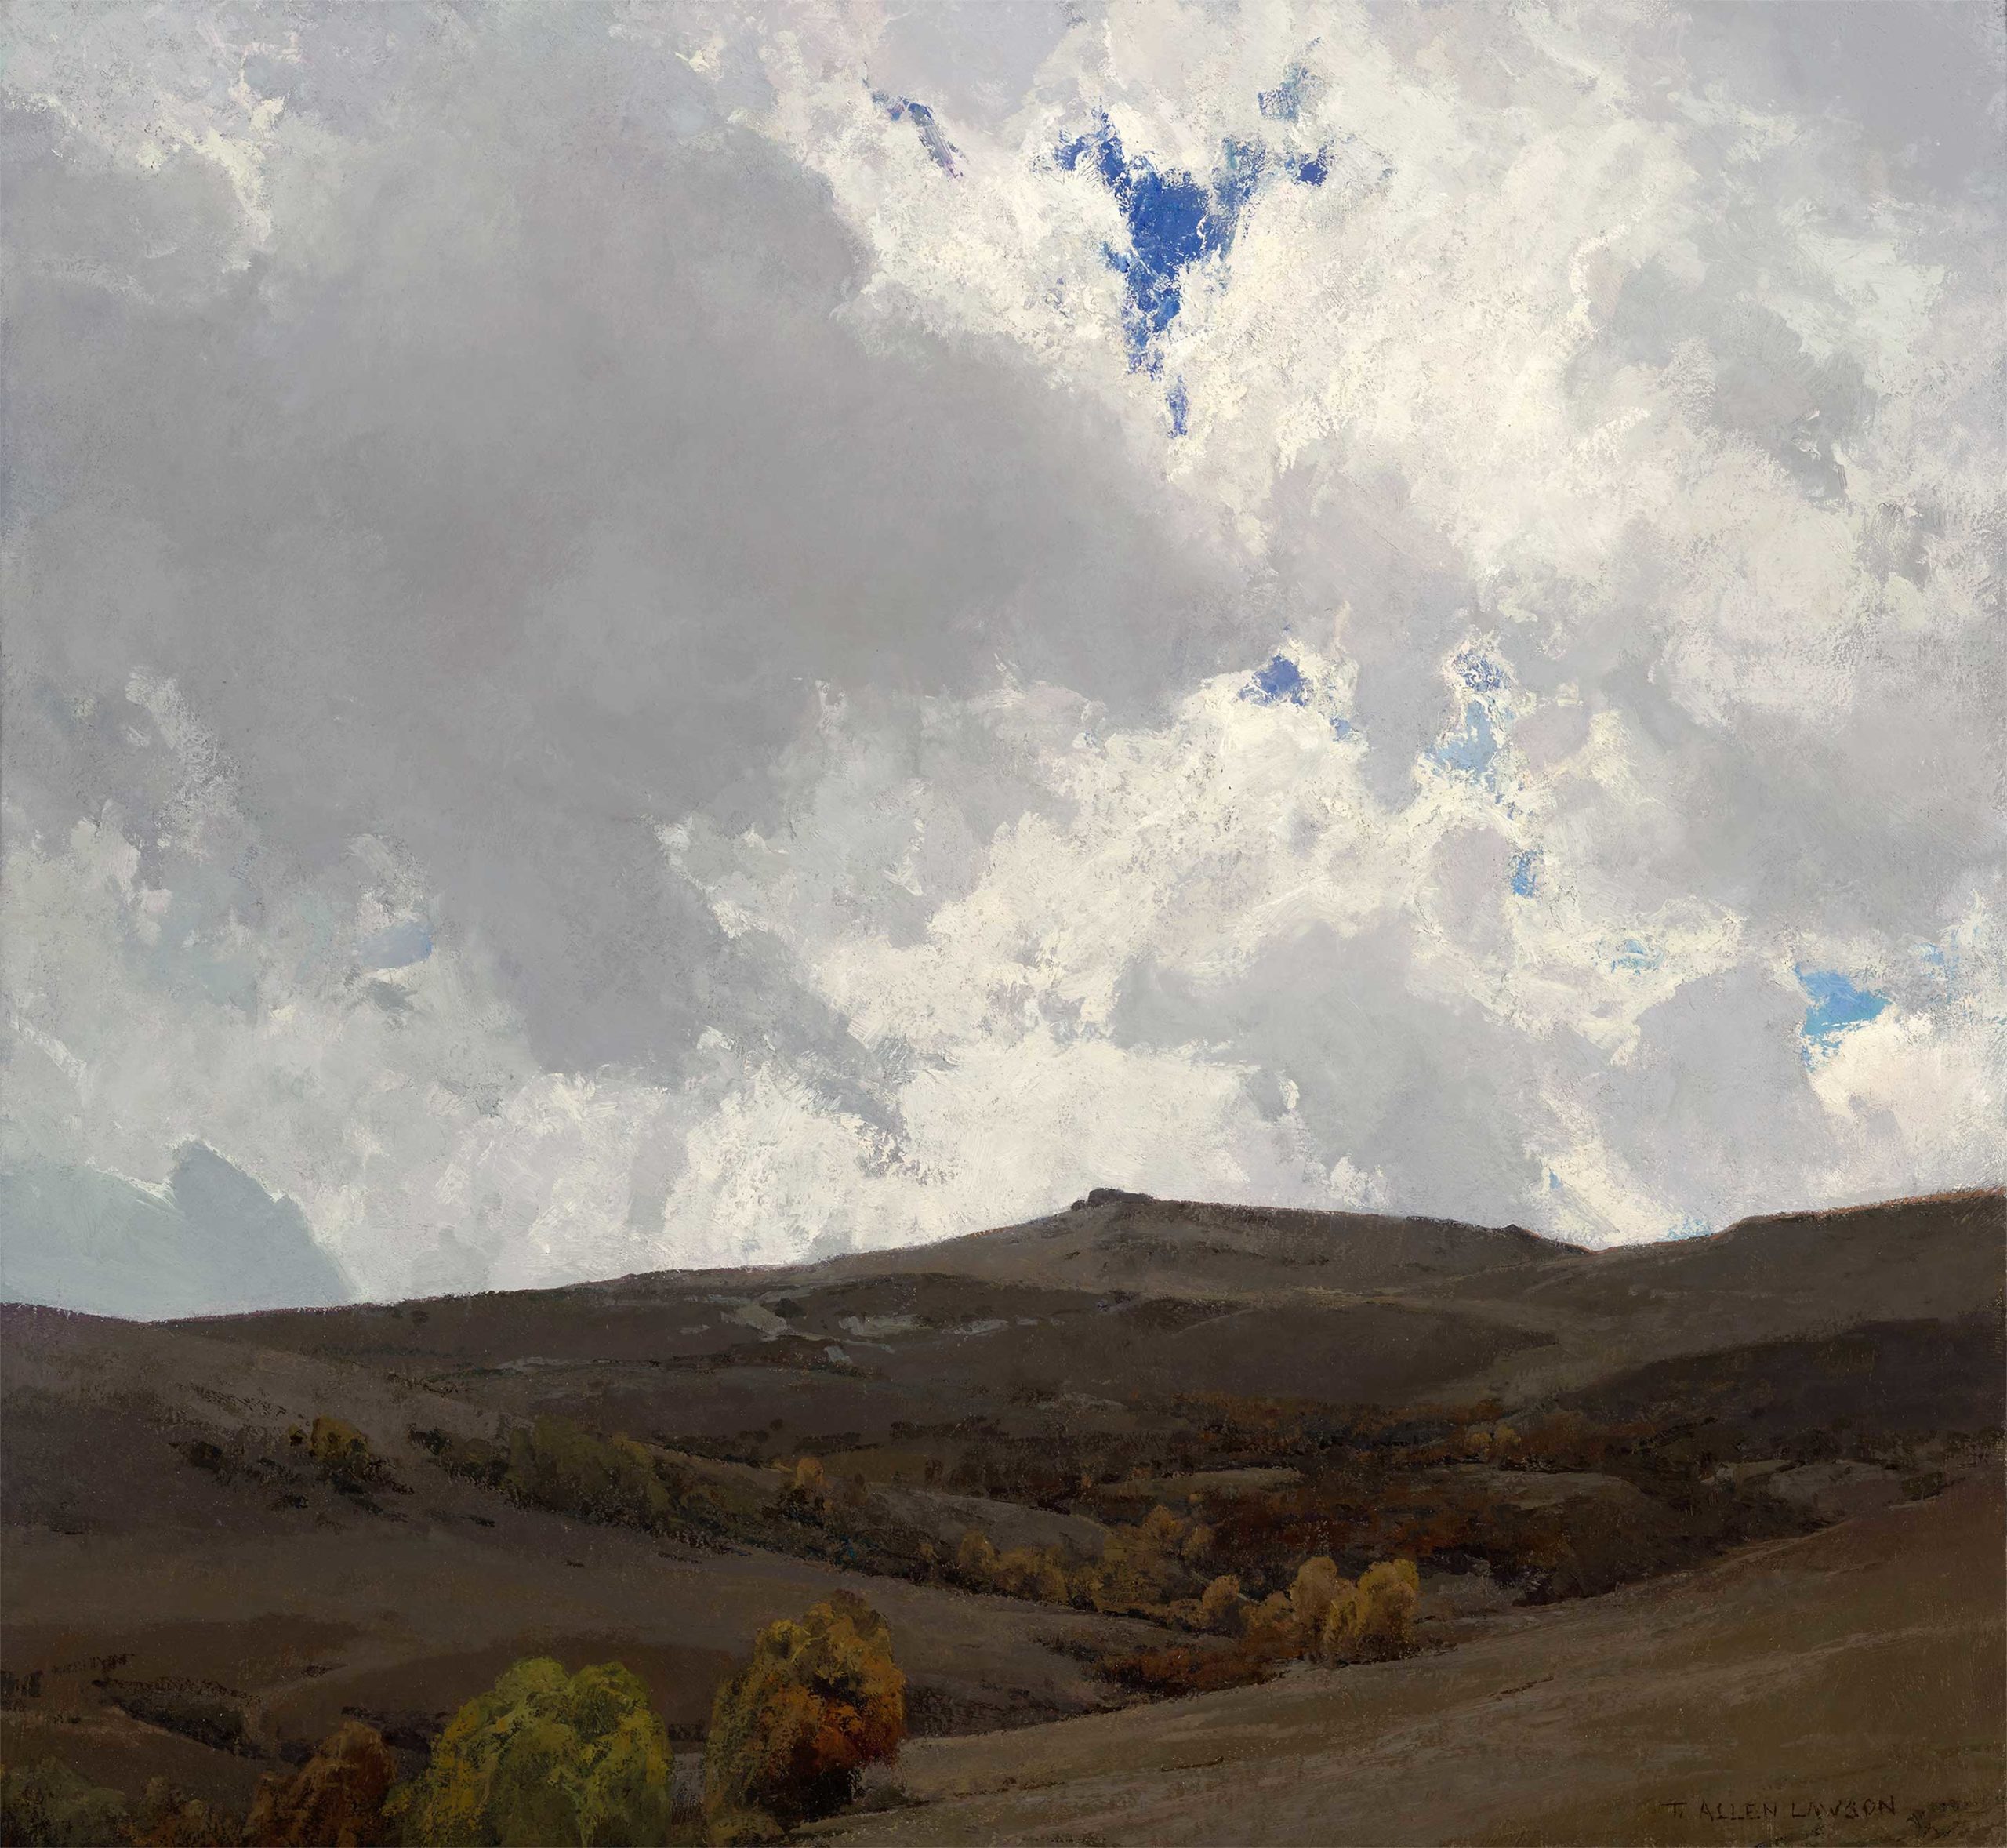 "Cloud Dance" by T. Allen Lawson, who is on the faculty of Plein Air Live 2023